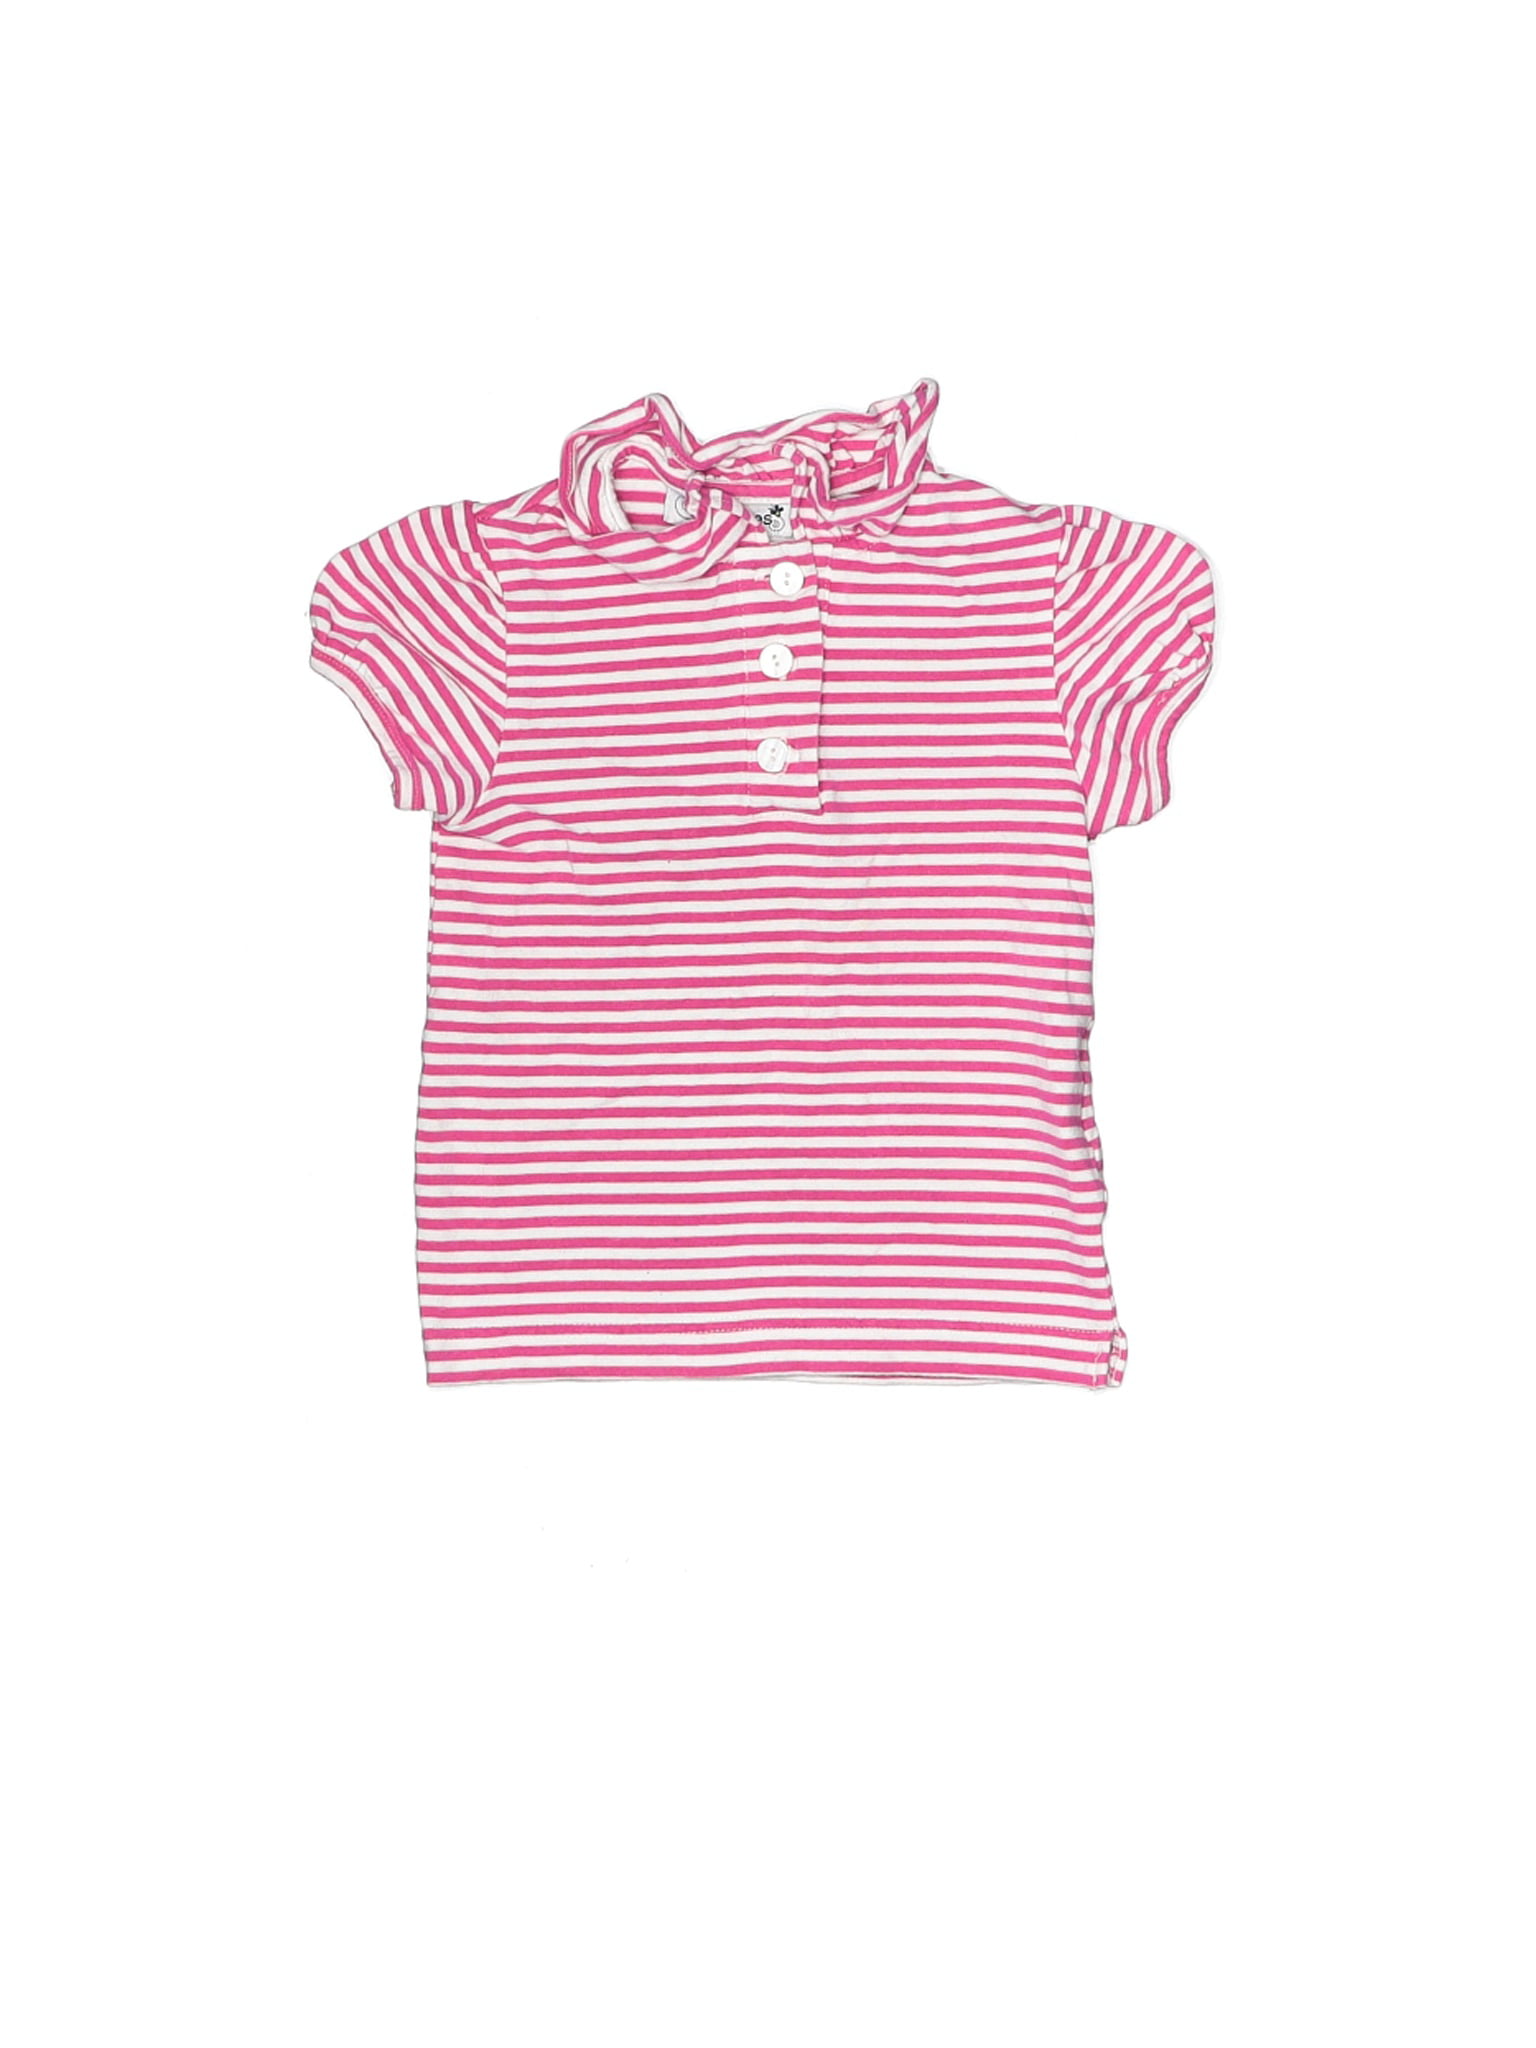 Busy Bees Short Sleeve Collar Shirt Pink-White 